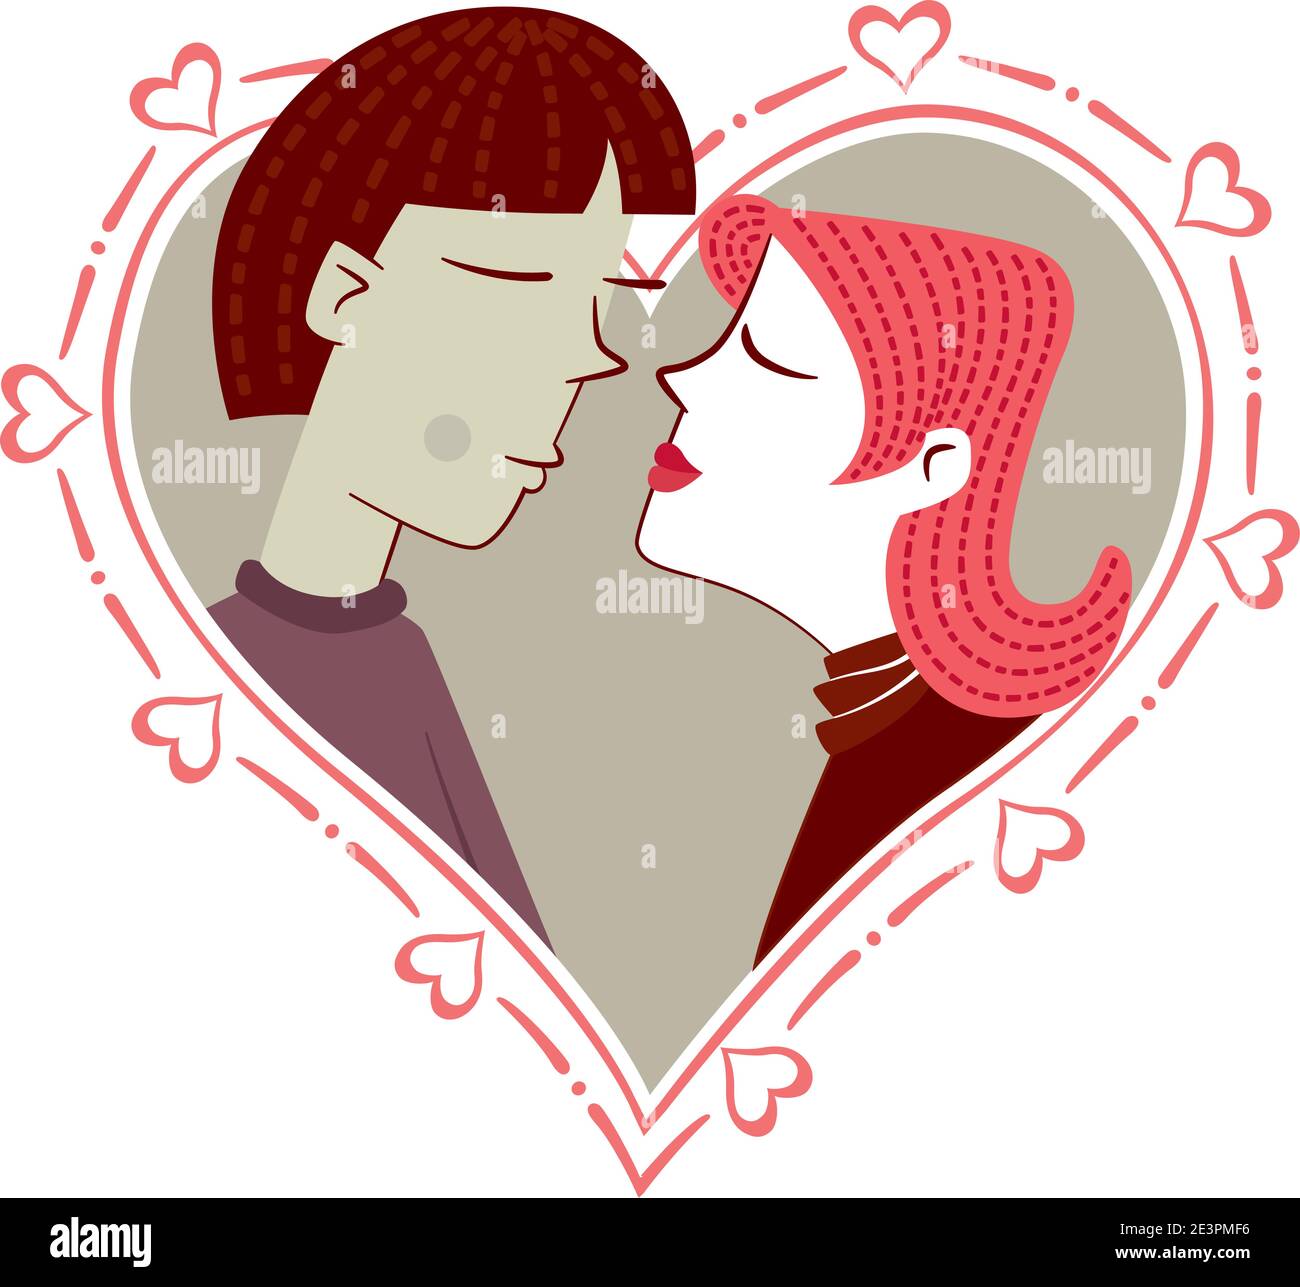 A young Asian man and a Caucasian girl kiss on a heart-shaped background. Stock Vector